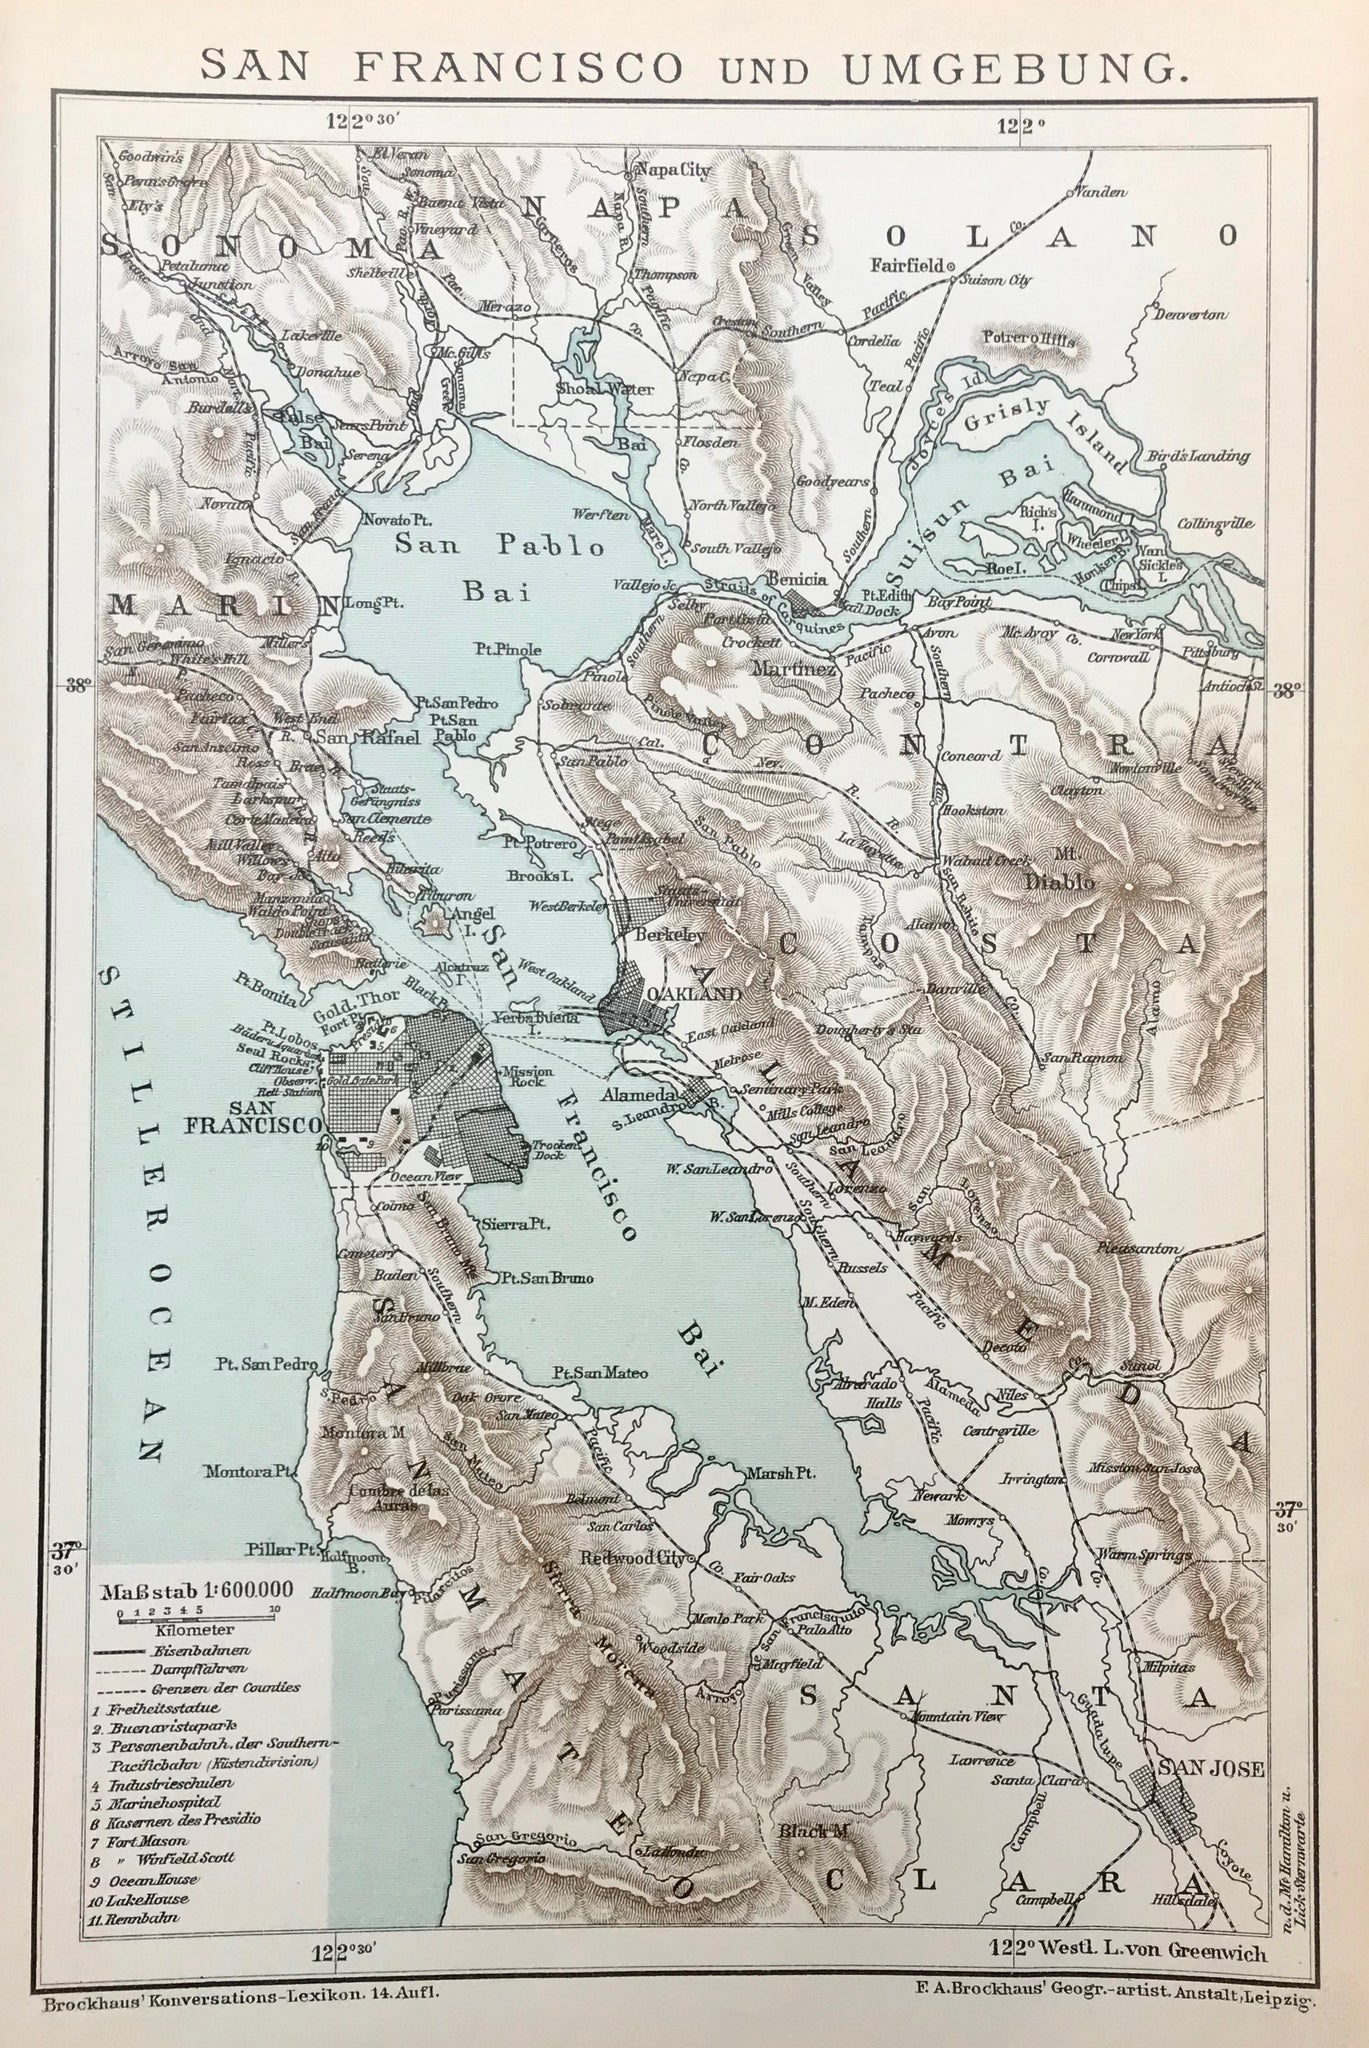 "San Francisco und Umgebung" (Sanfrancisco and surrounding area)  This print of the area around San Francisco was published 1895. The lines show the railway and ferry routes of the time. The county borders are shown.